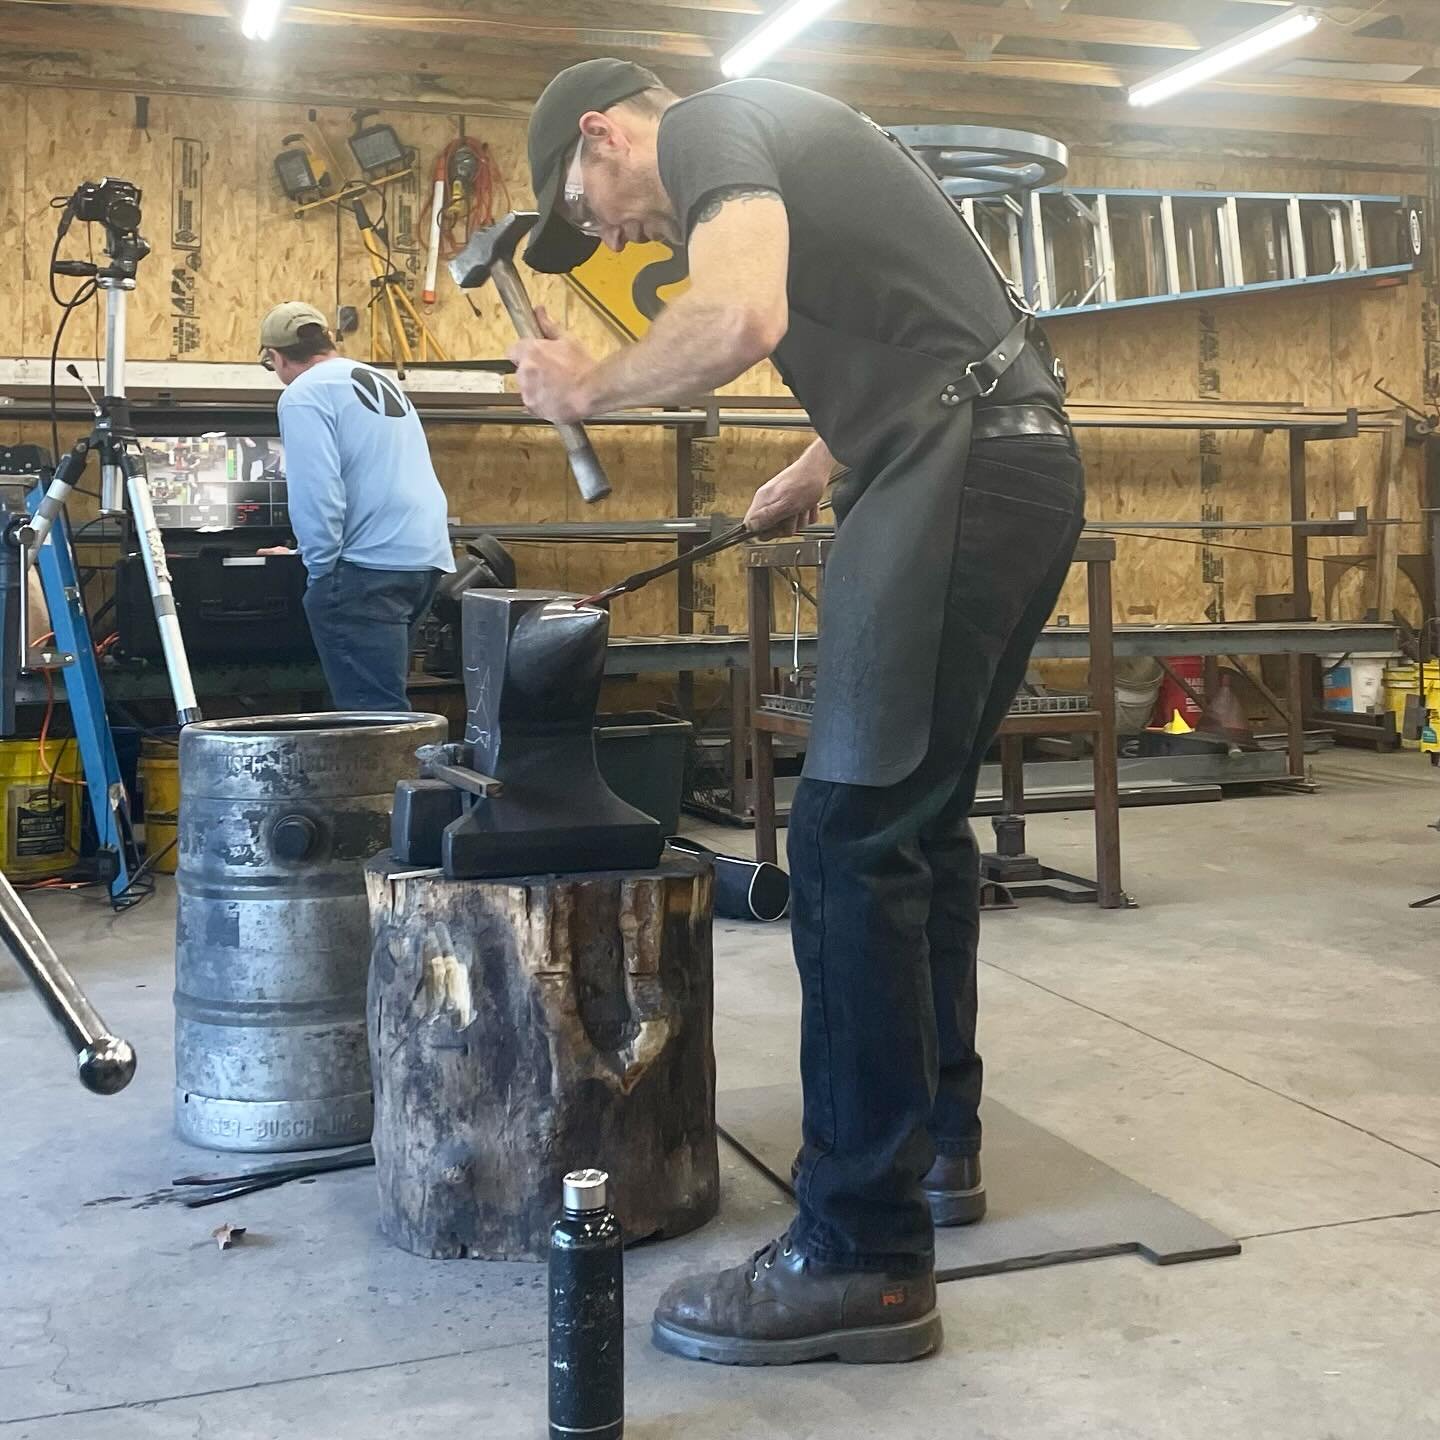 We had a great time hosting the folks from @cv_blacksmith_guild at our studios this weekend. So great to see old friends and make some new ones. 🌟

Kyle demonstrated his techniques for forging the ginkgo leaves in our latest collaborative sculpture 